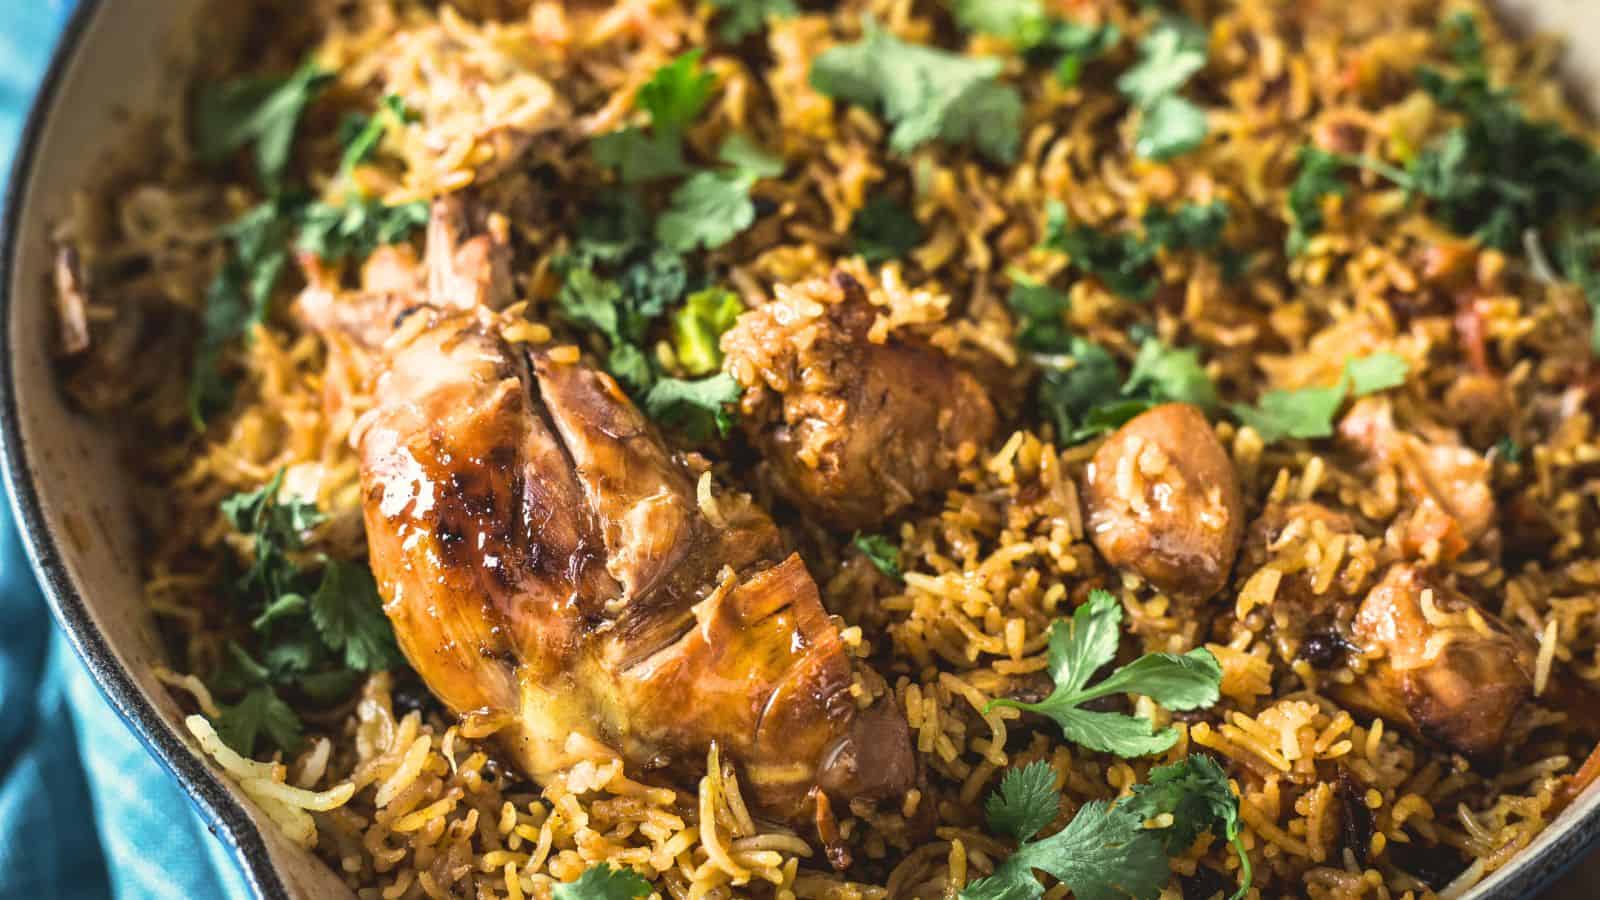 A skillet filled with biryani, a grandma's comfort food classic, featuring rice, chicken, and garnished with cilantro.